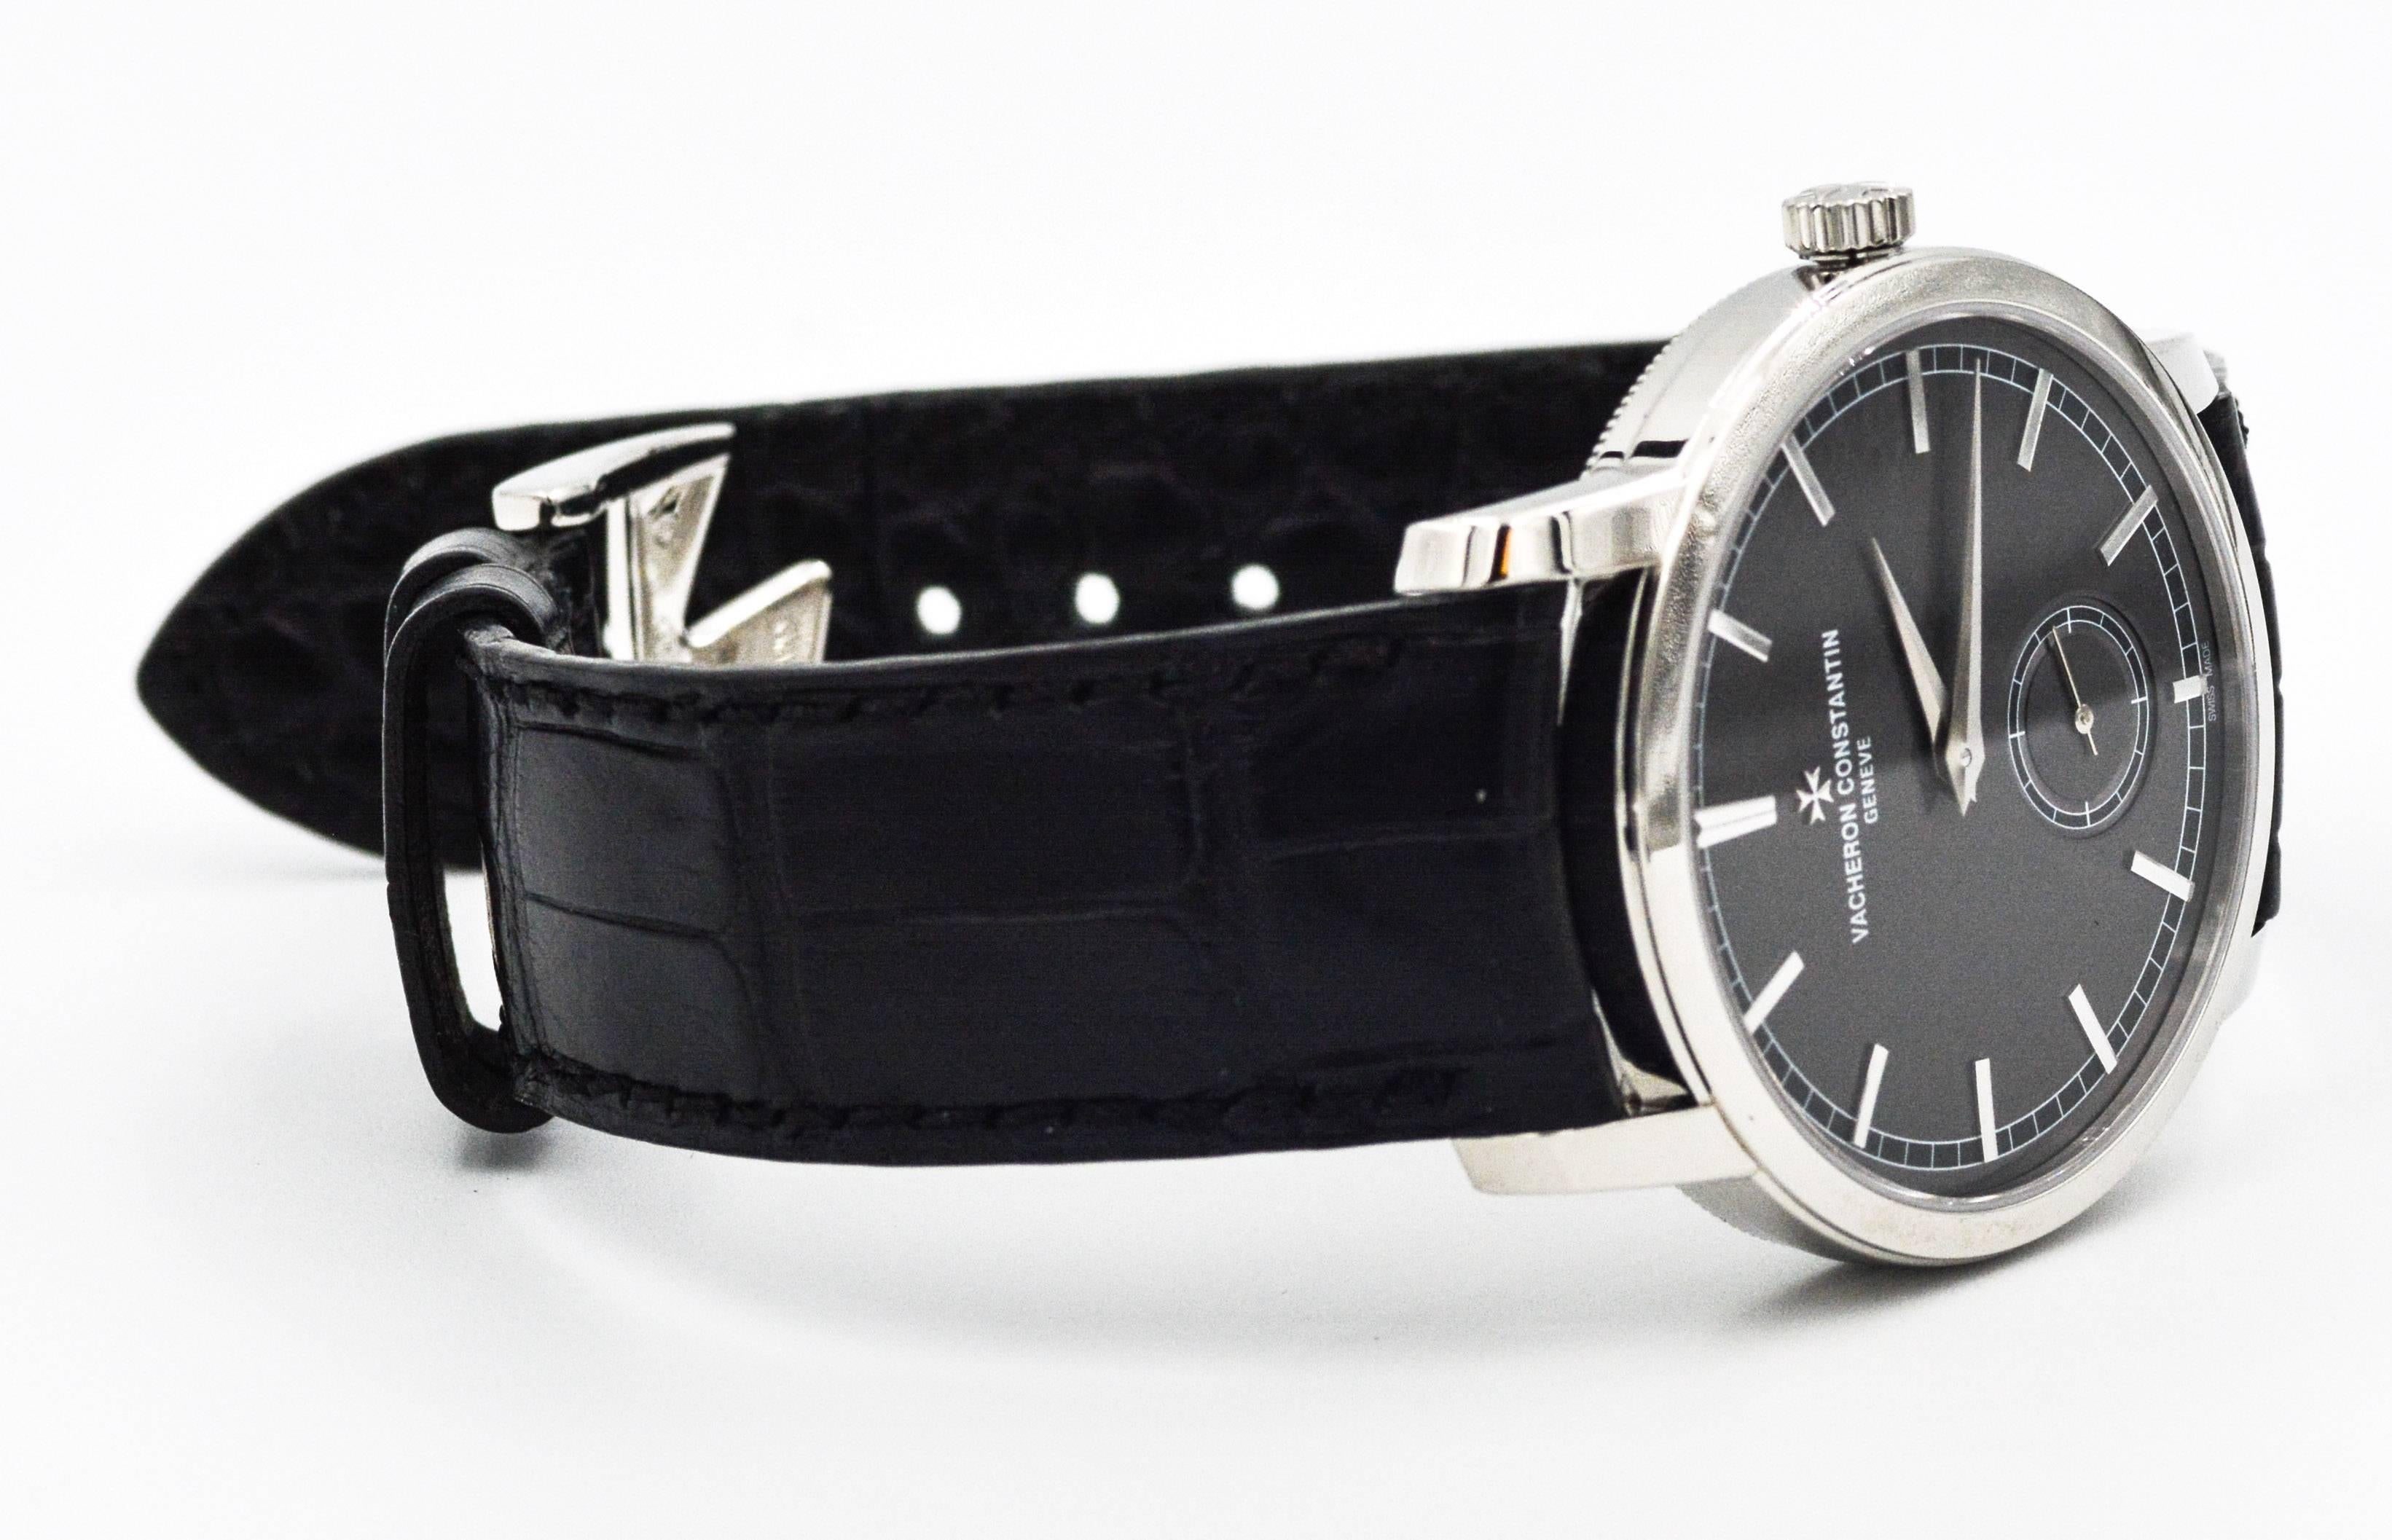 A masculine Vacheron Constantin Traditionnelle watch in platinum, 38mm with a manual-winding movement. and outfitted with a handsome black leather band.
